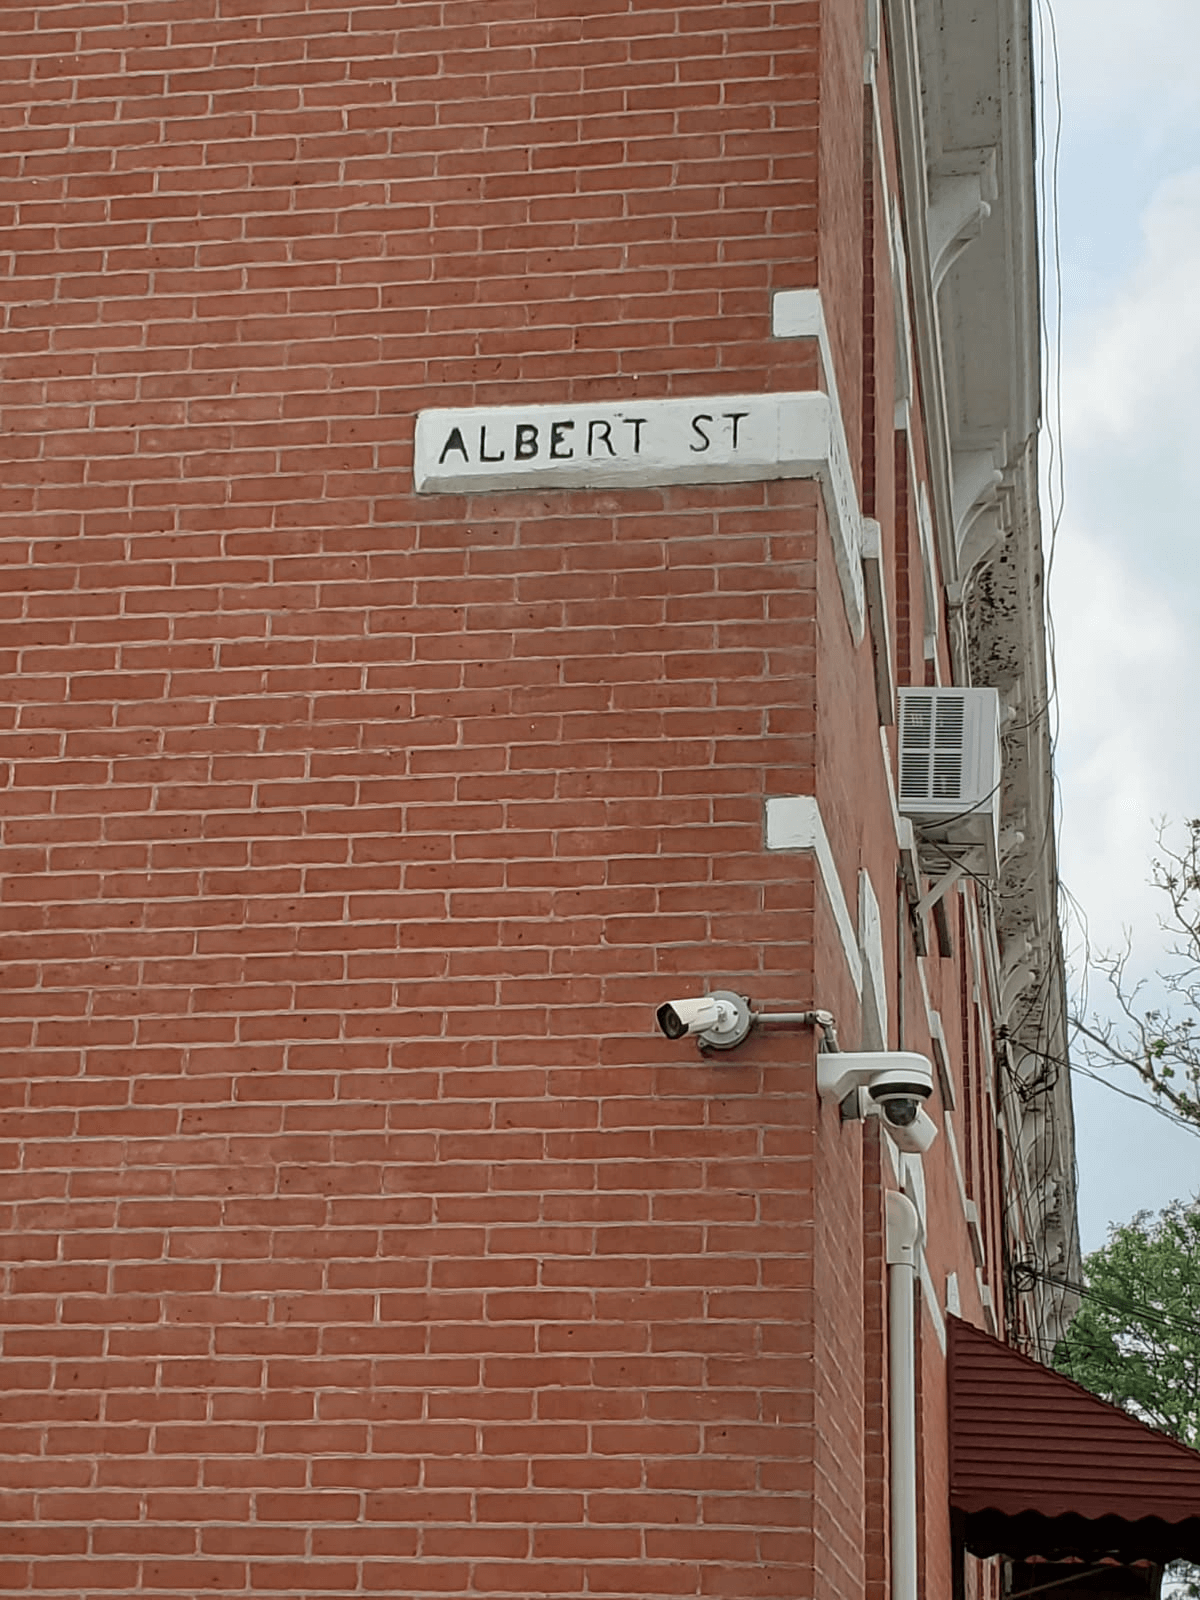 A red brick building with a sign that says "Albert Street"